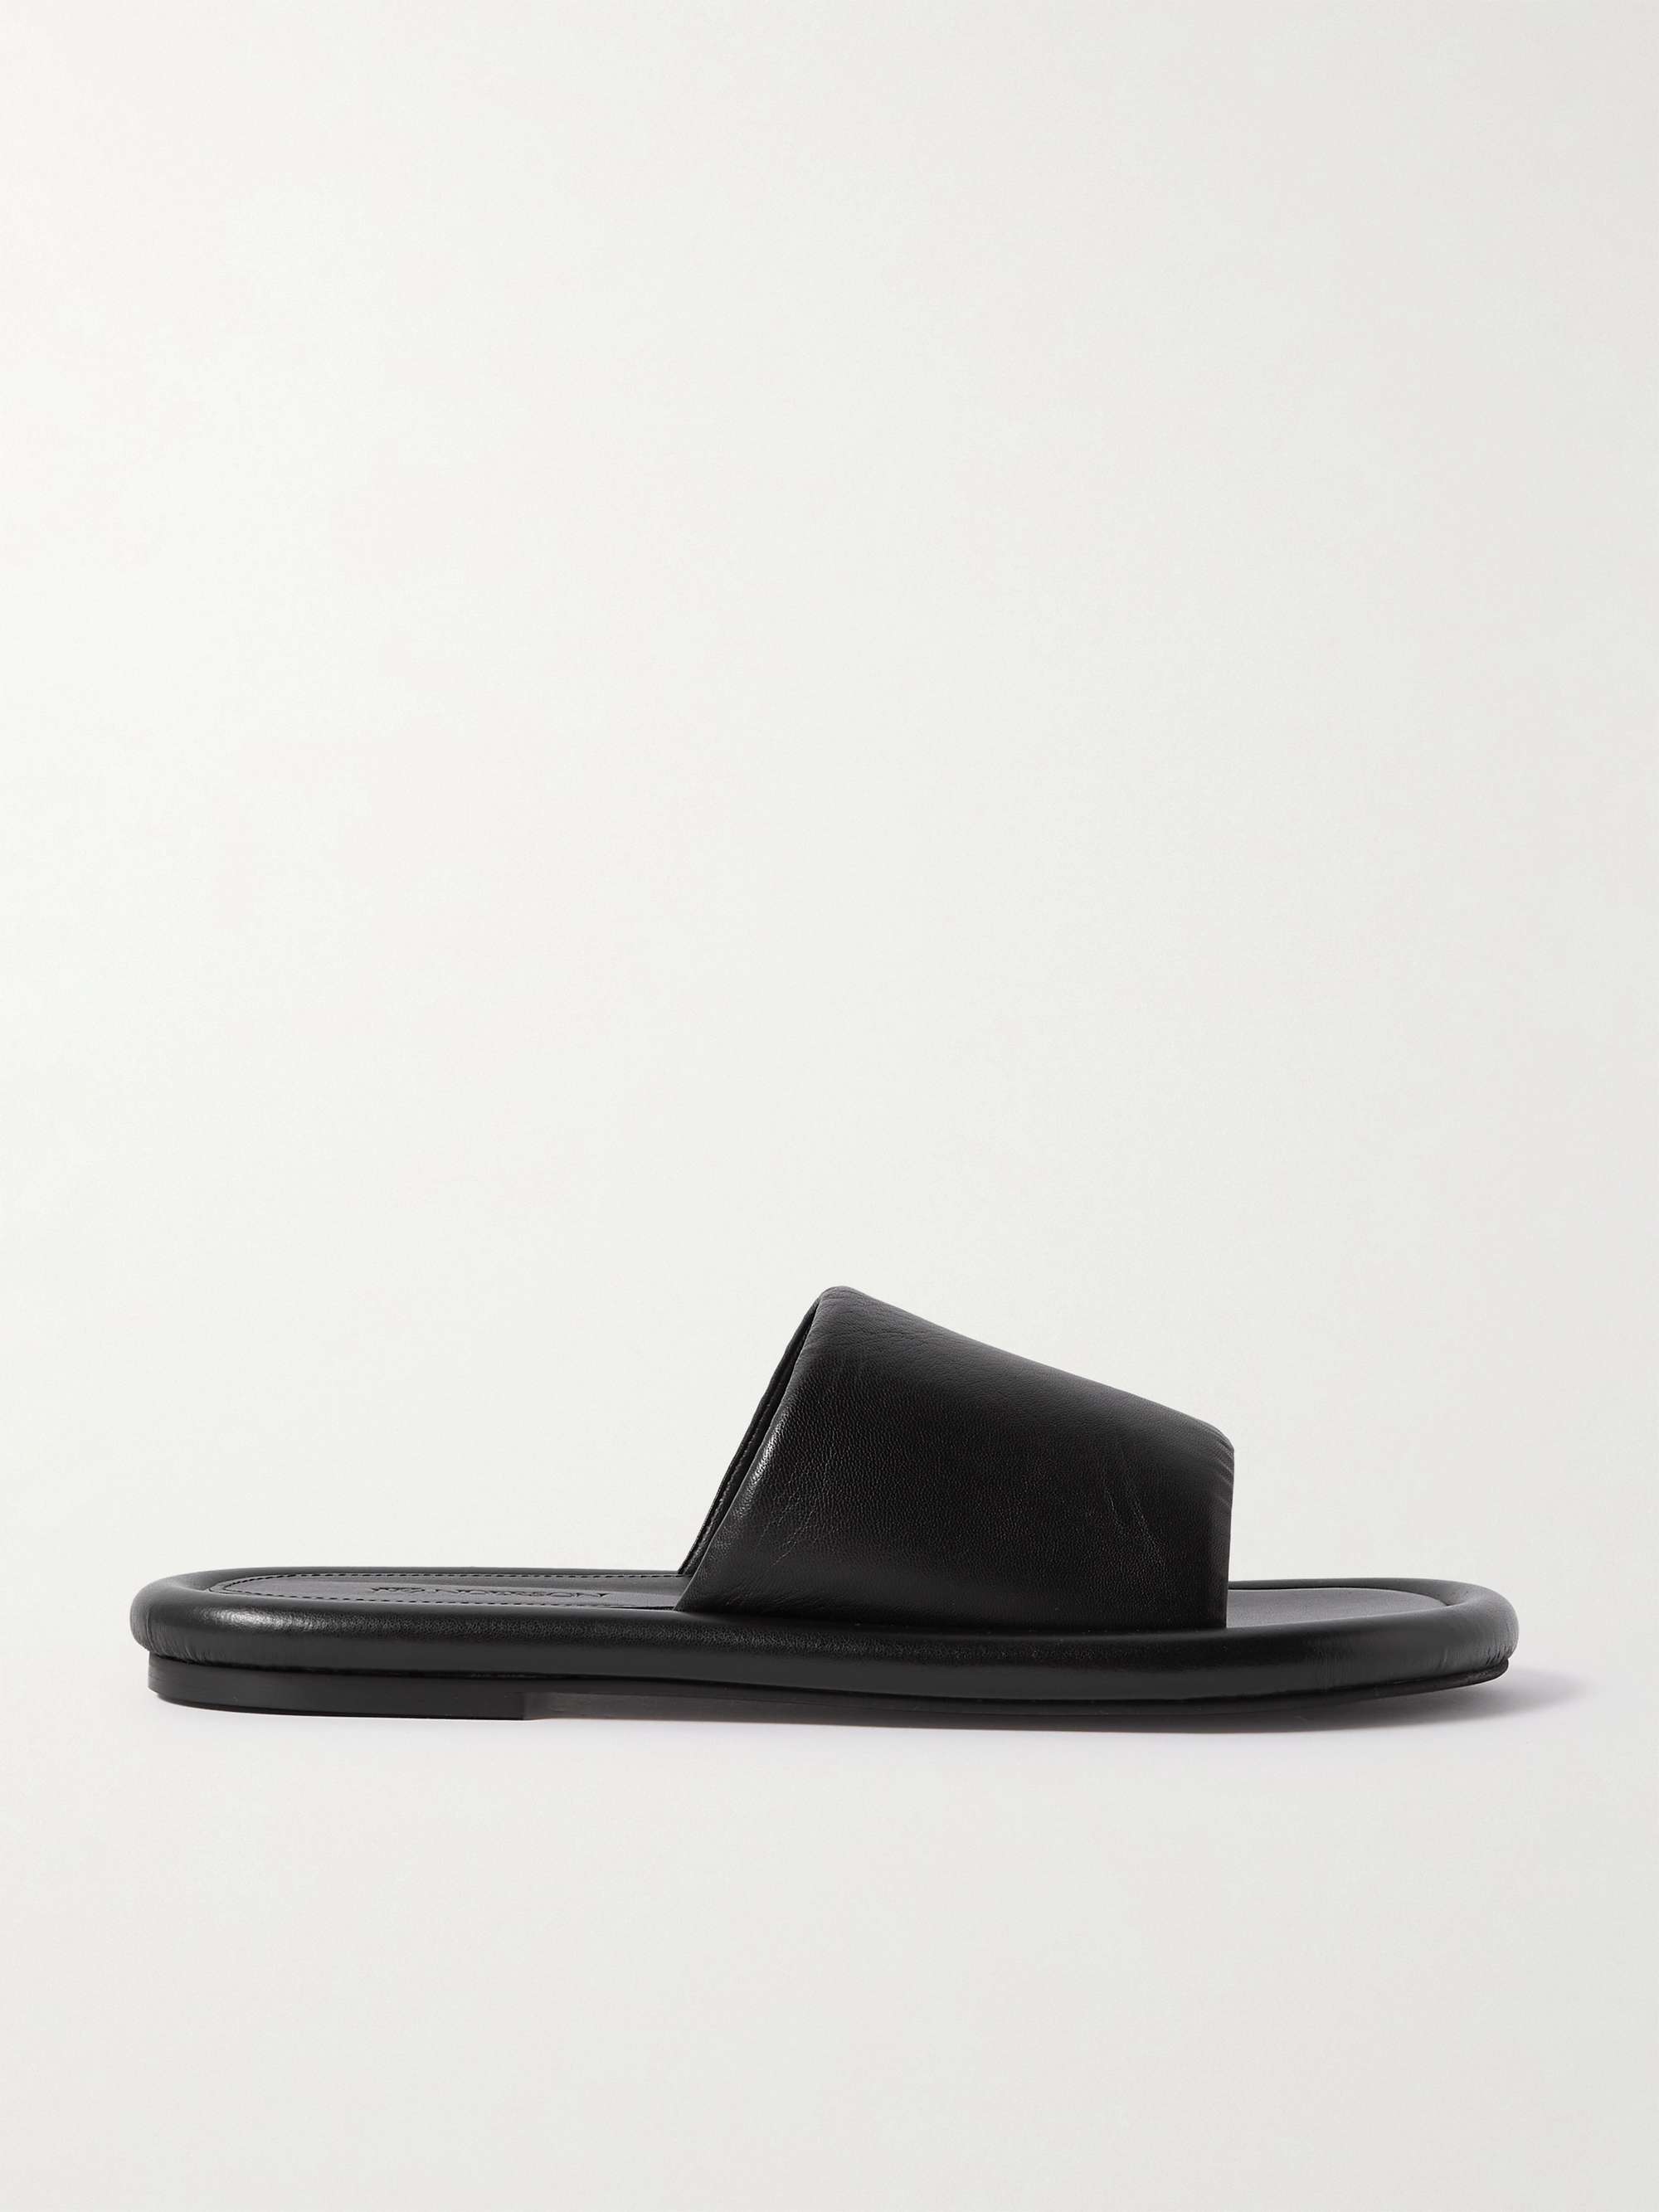 JW ANDERSON Two-Tone Leather Slippers